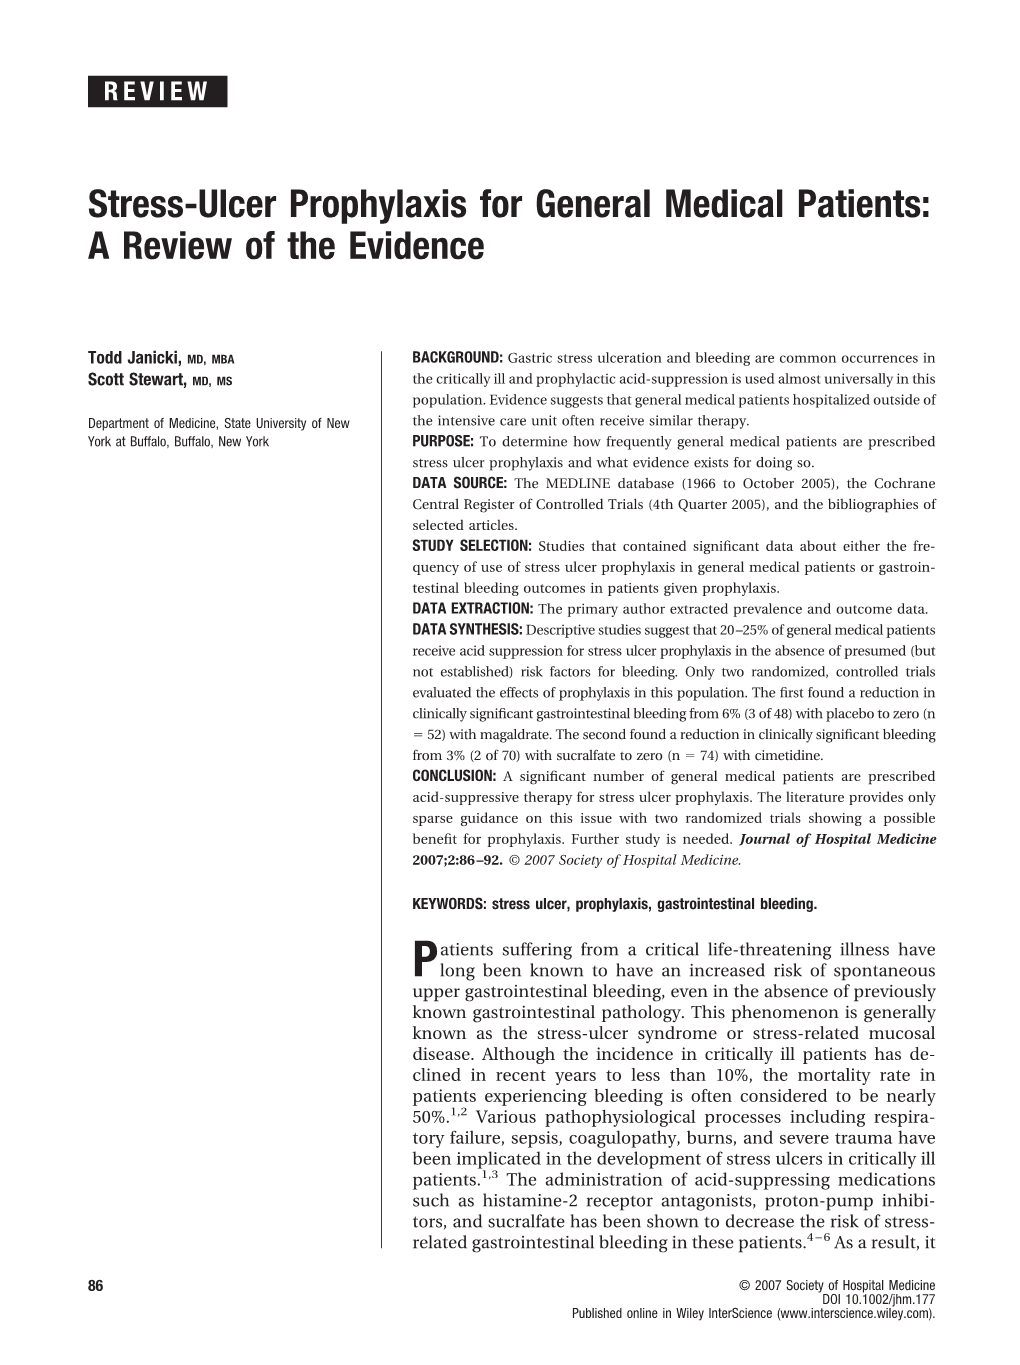 Stress-Ulcer Prophylaxis for General Medical Patients: a Review of the Evidence